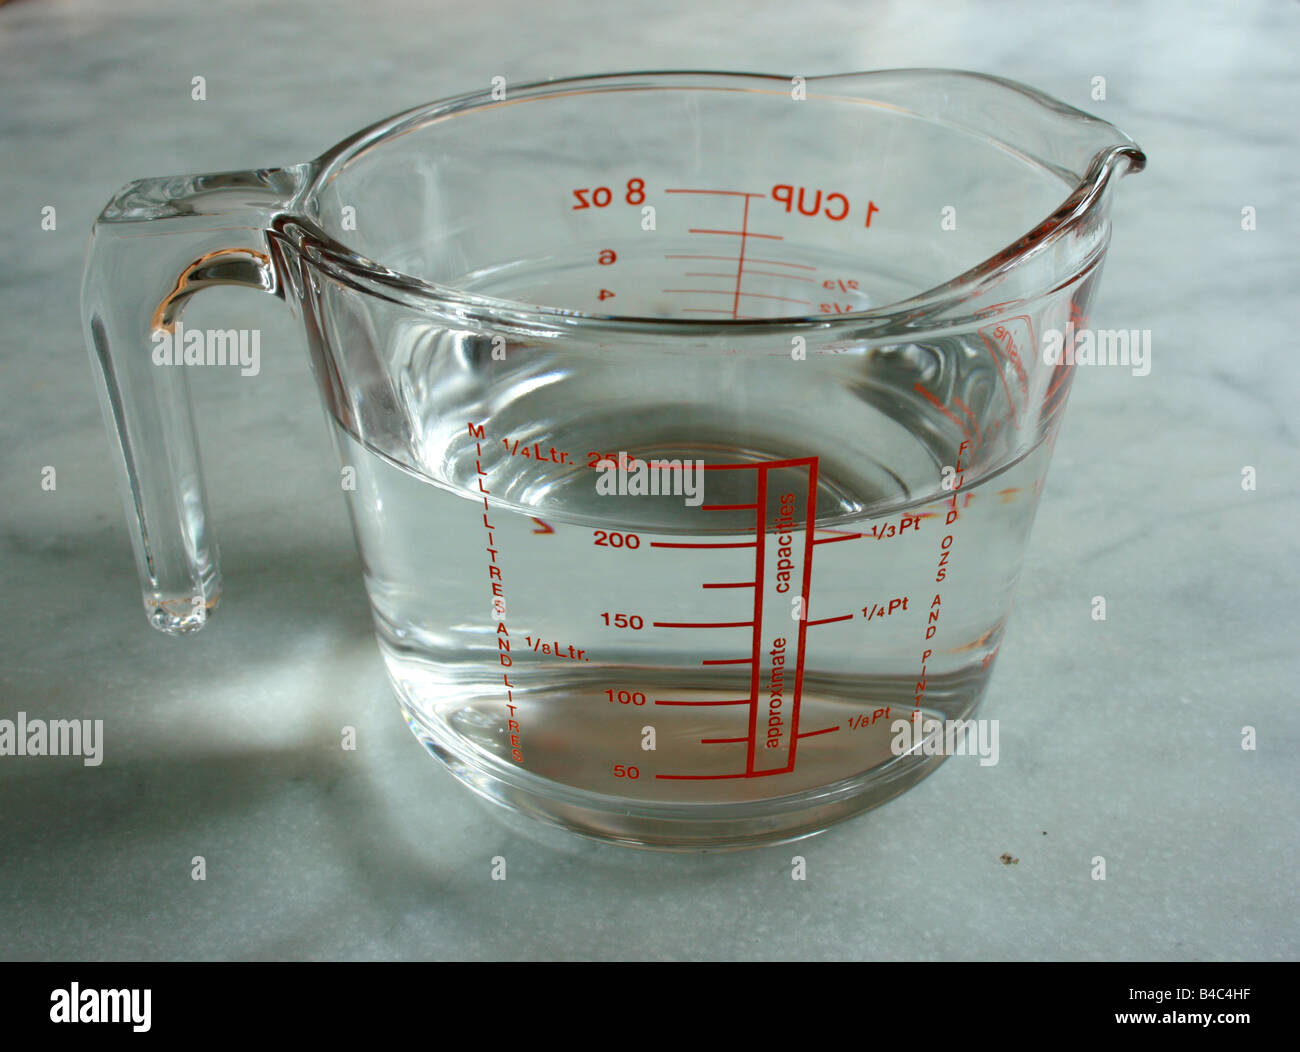 https://c8.alamy.com/comp/B4C4HF/a-pyrex-jug-containing-water-viewed-from-the-side-B4C4HF.jpg